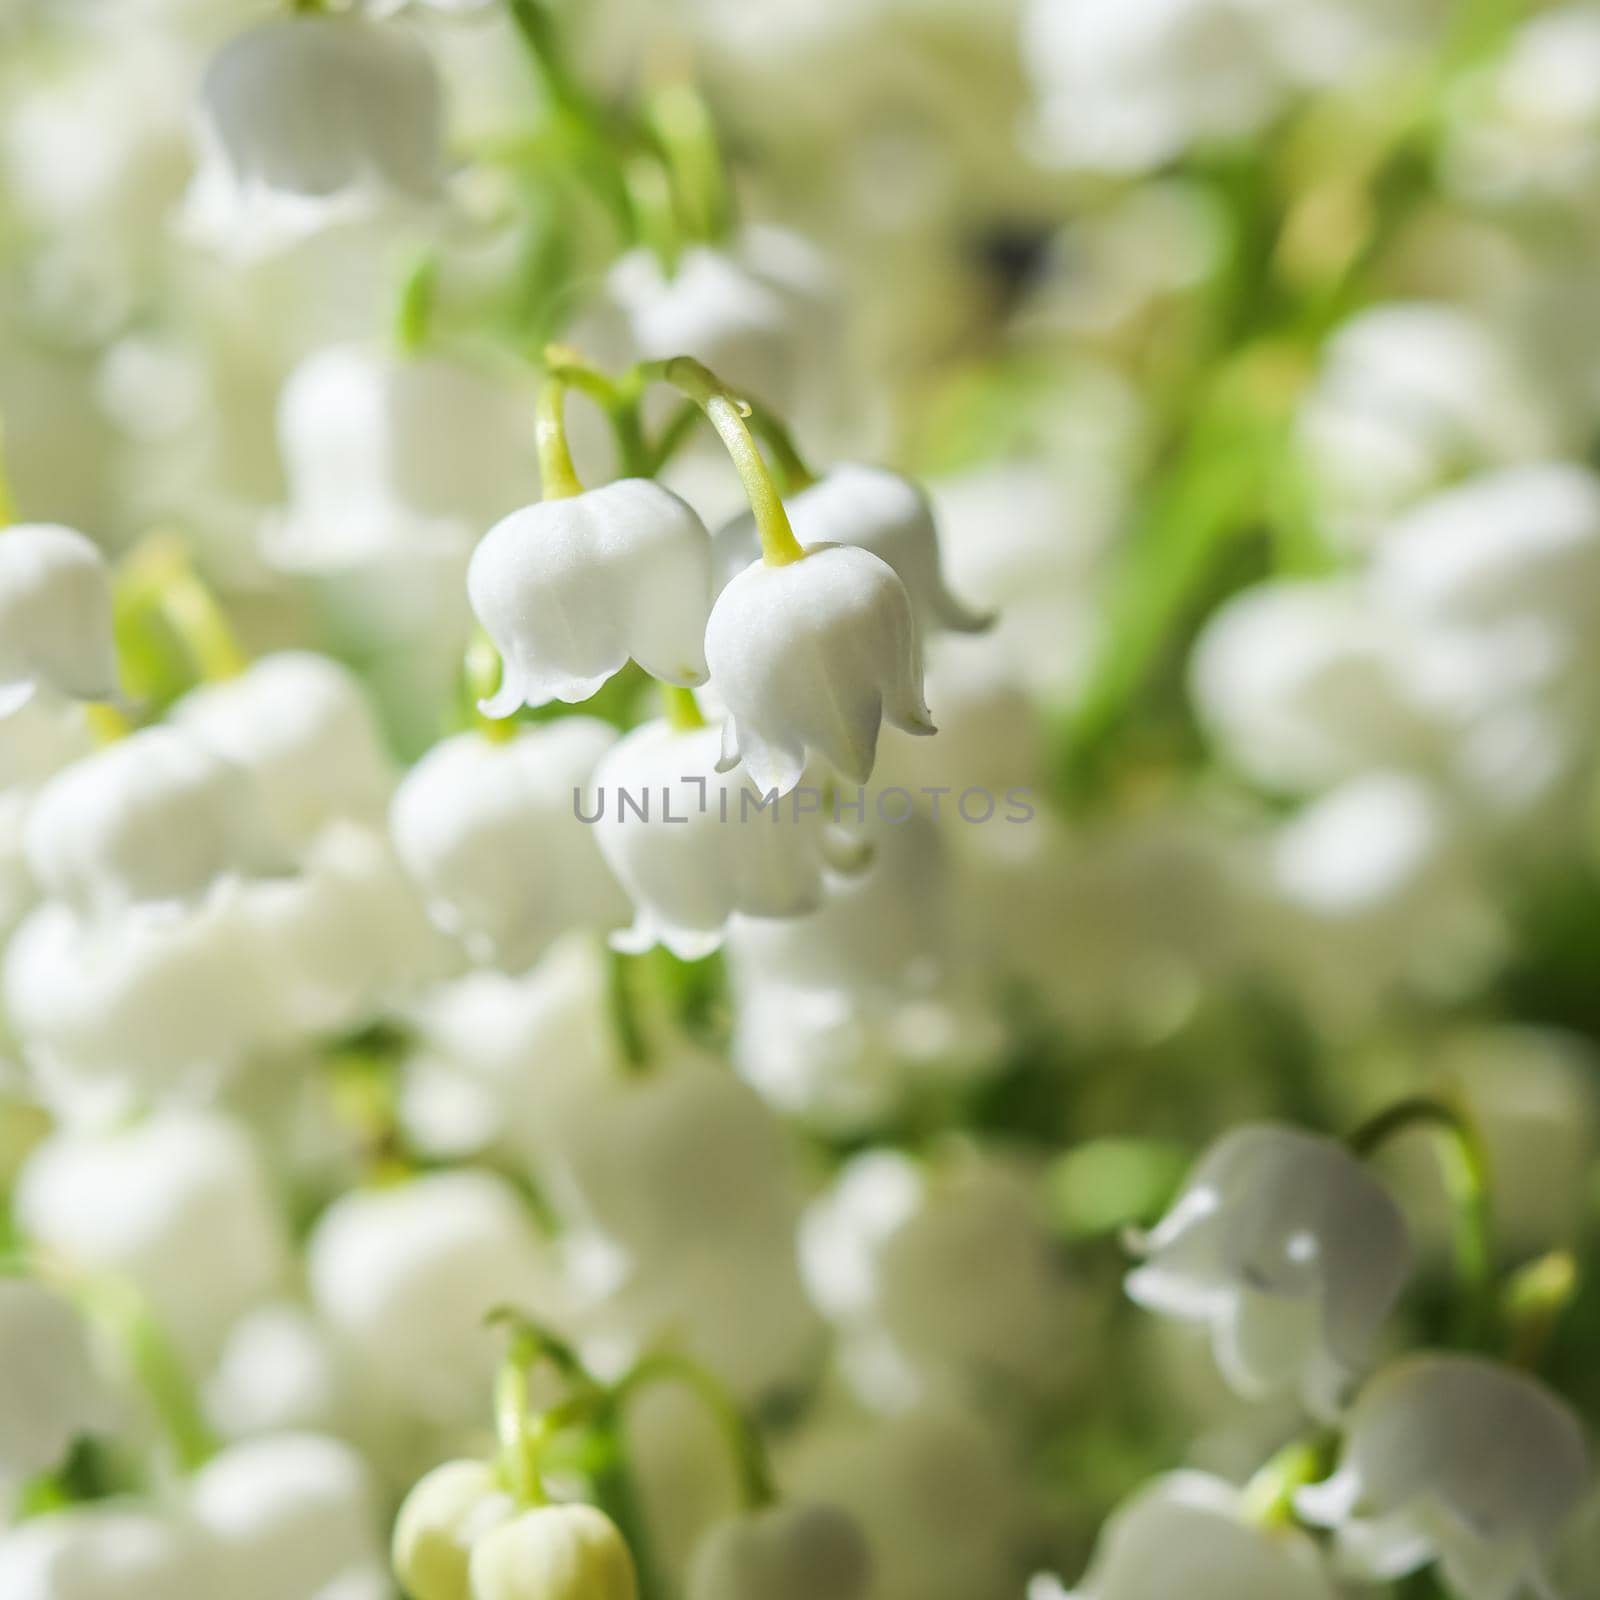 Blooming lily of the valley flowers. Natural floral background by Olayola